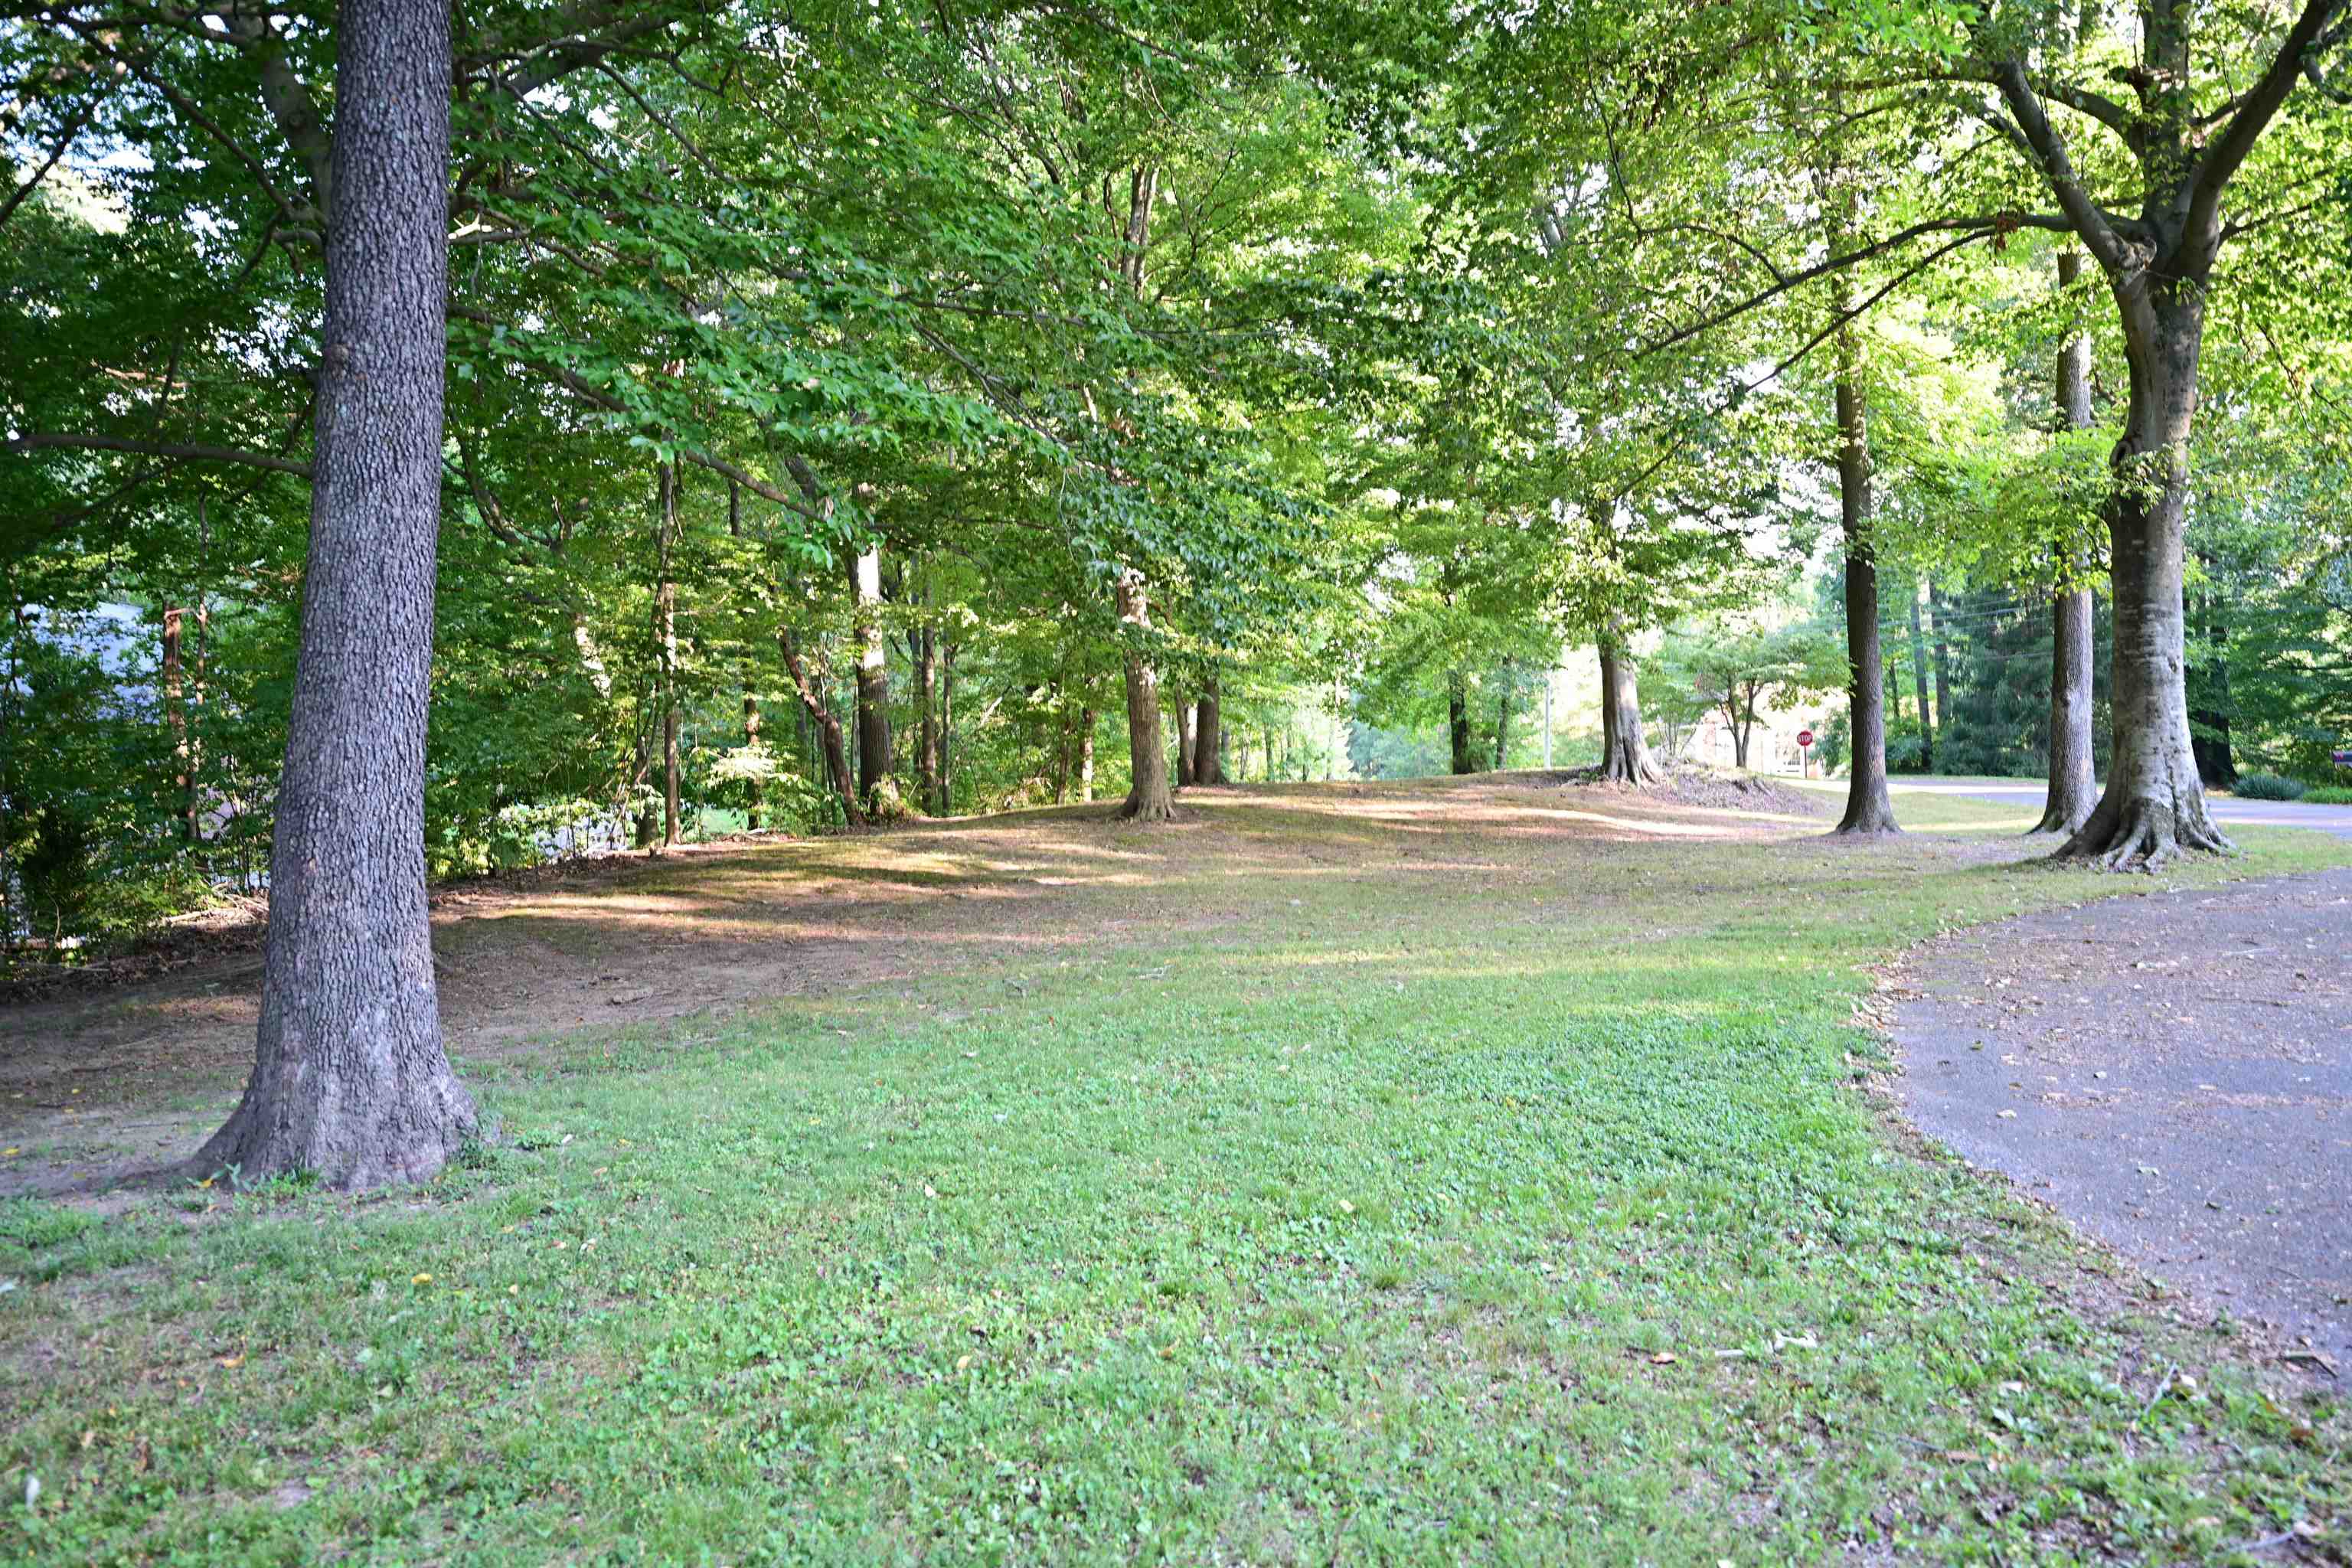 Extra 1.1 acre lot in front of the property.